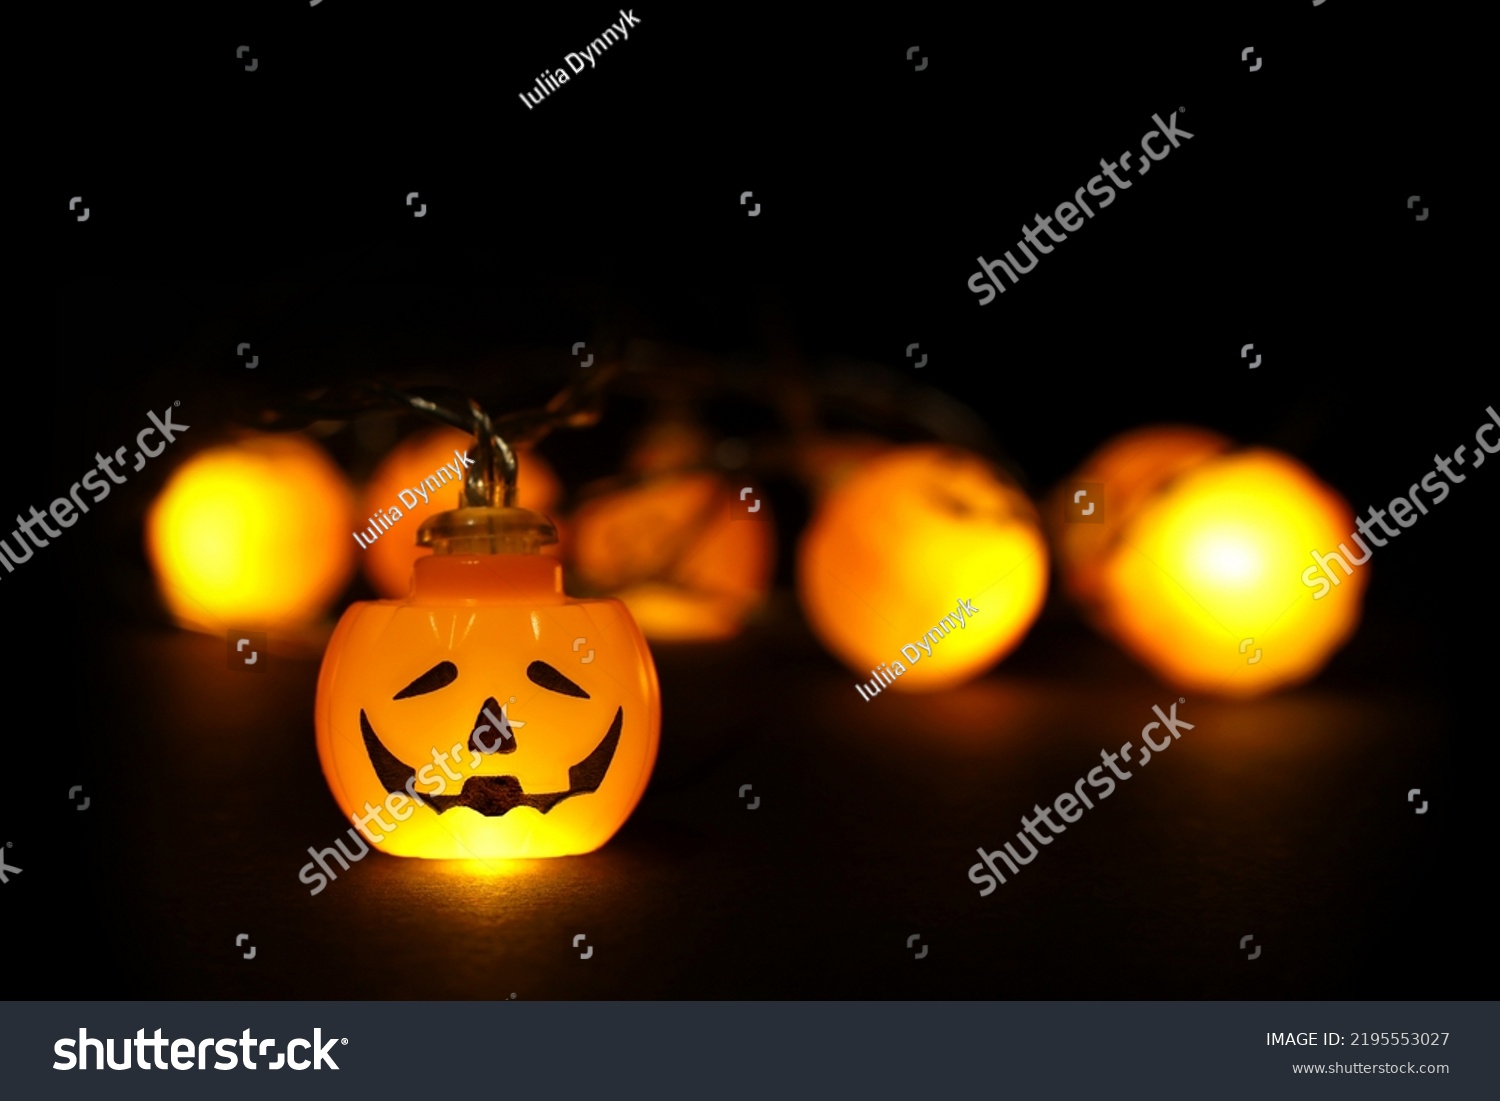 Garland lights of glowing halloween orange pumpkins with copy space above and below on black background. Blurred bokeh lights, one pumpkin face focused, close up. Festive holidays Halloween concept. #2195553027